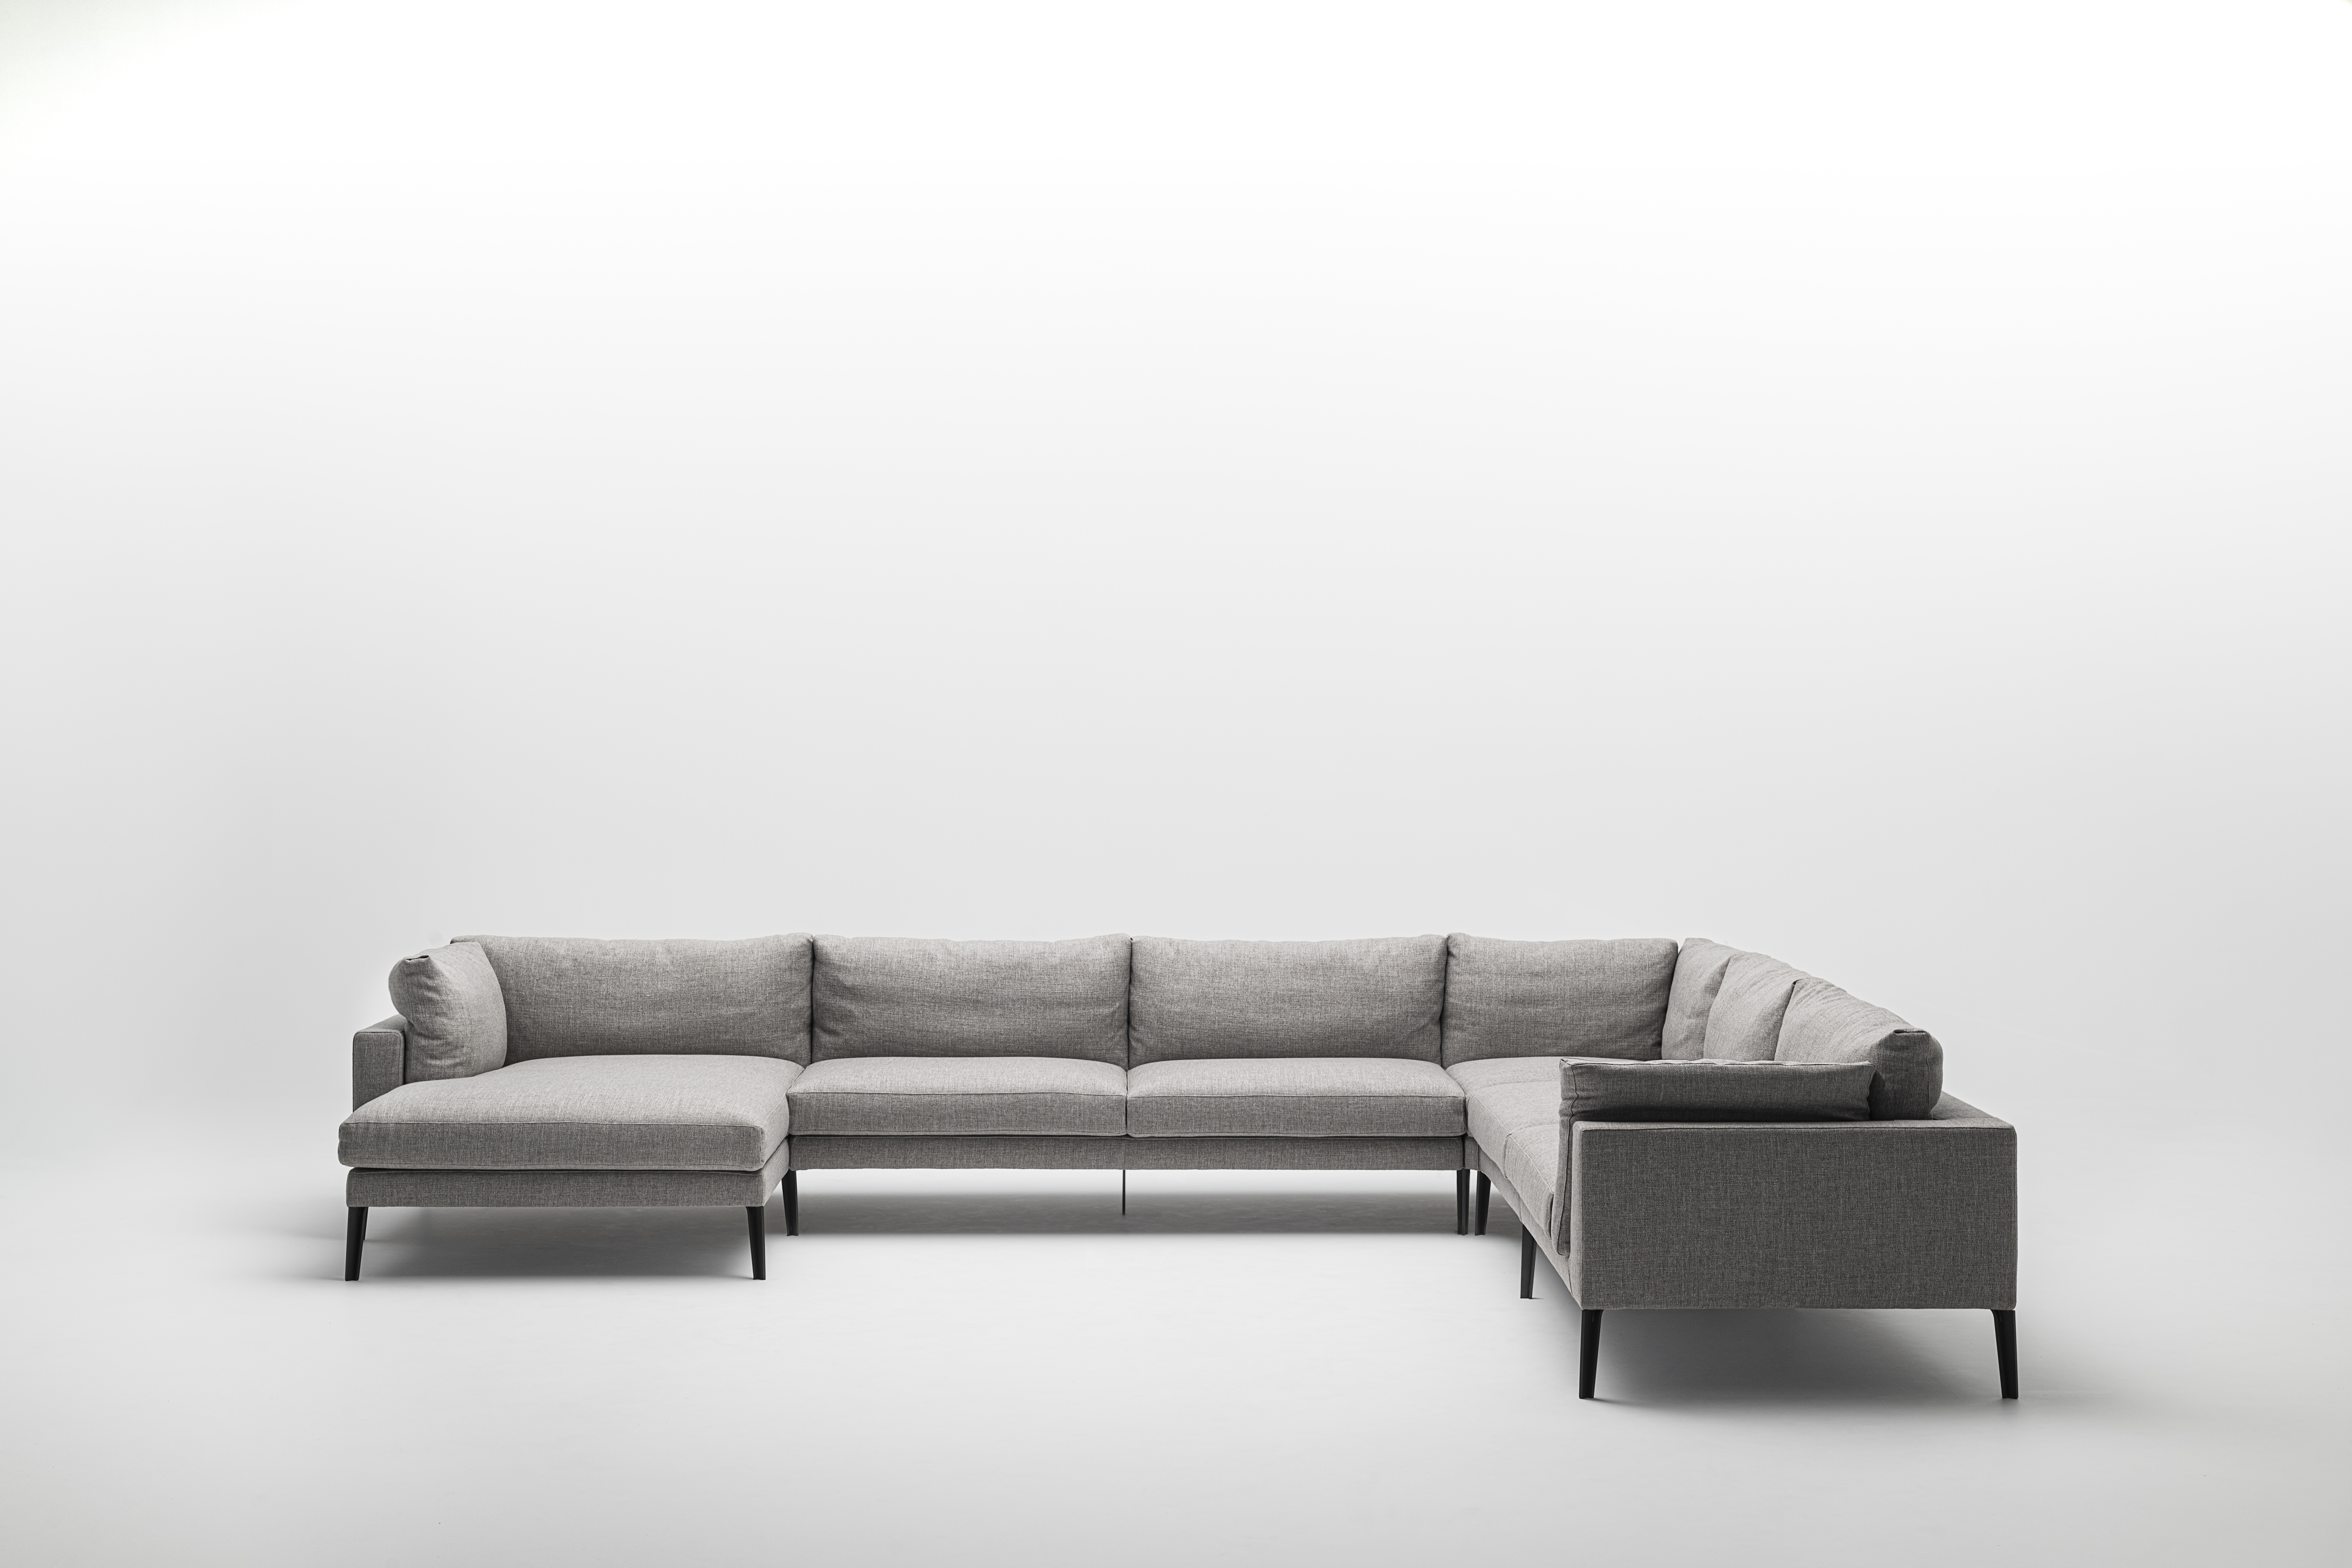 The Floyd sofa extension by Piero Lissoni was developed during lockdown and will be launched in Milan in September. at both a digital and showroom event. Photo c/o Livinig Divani. 